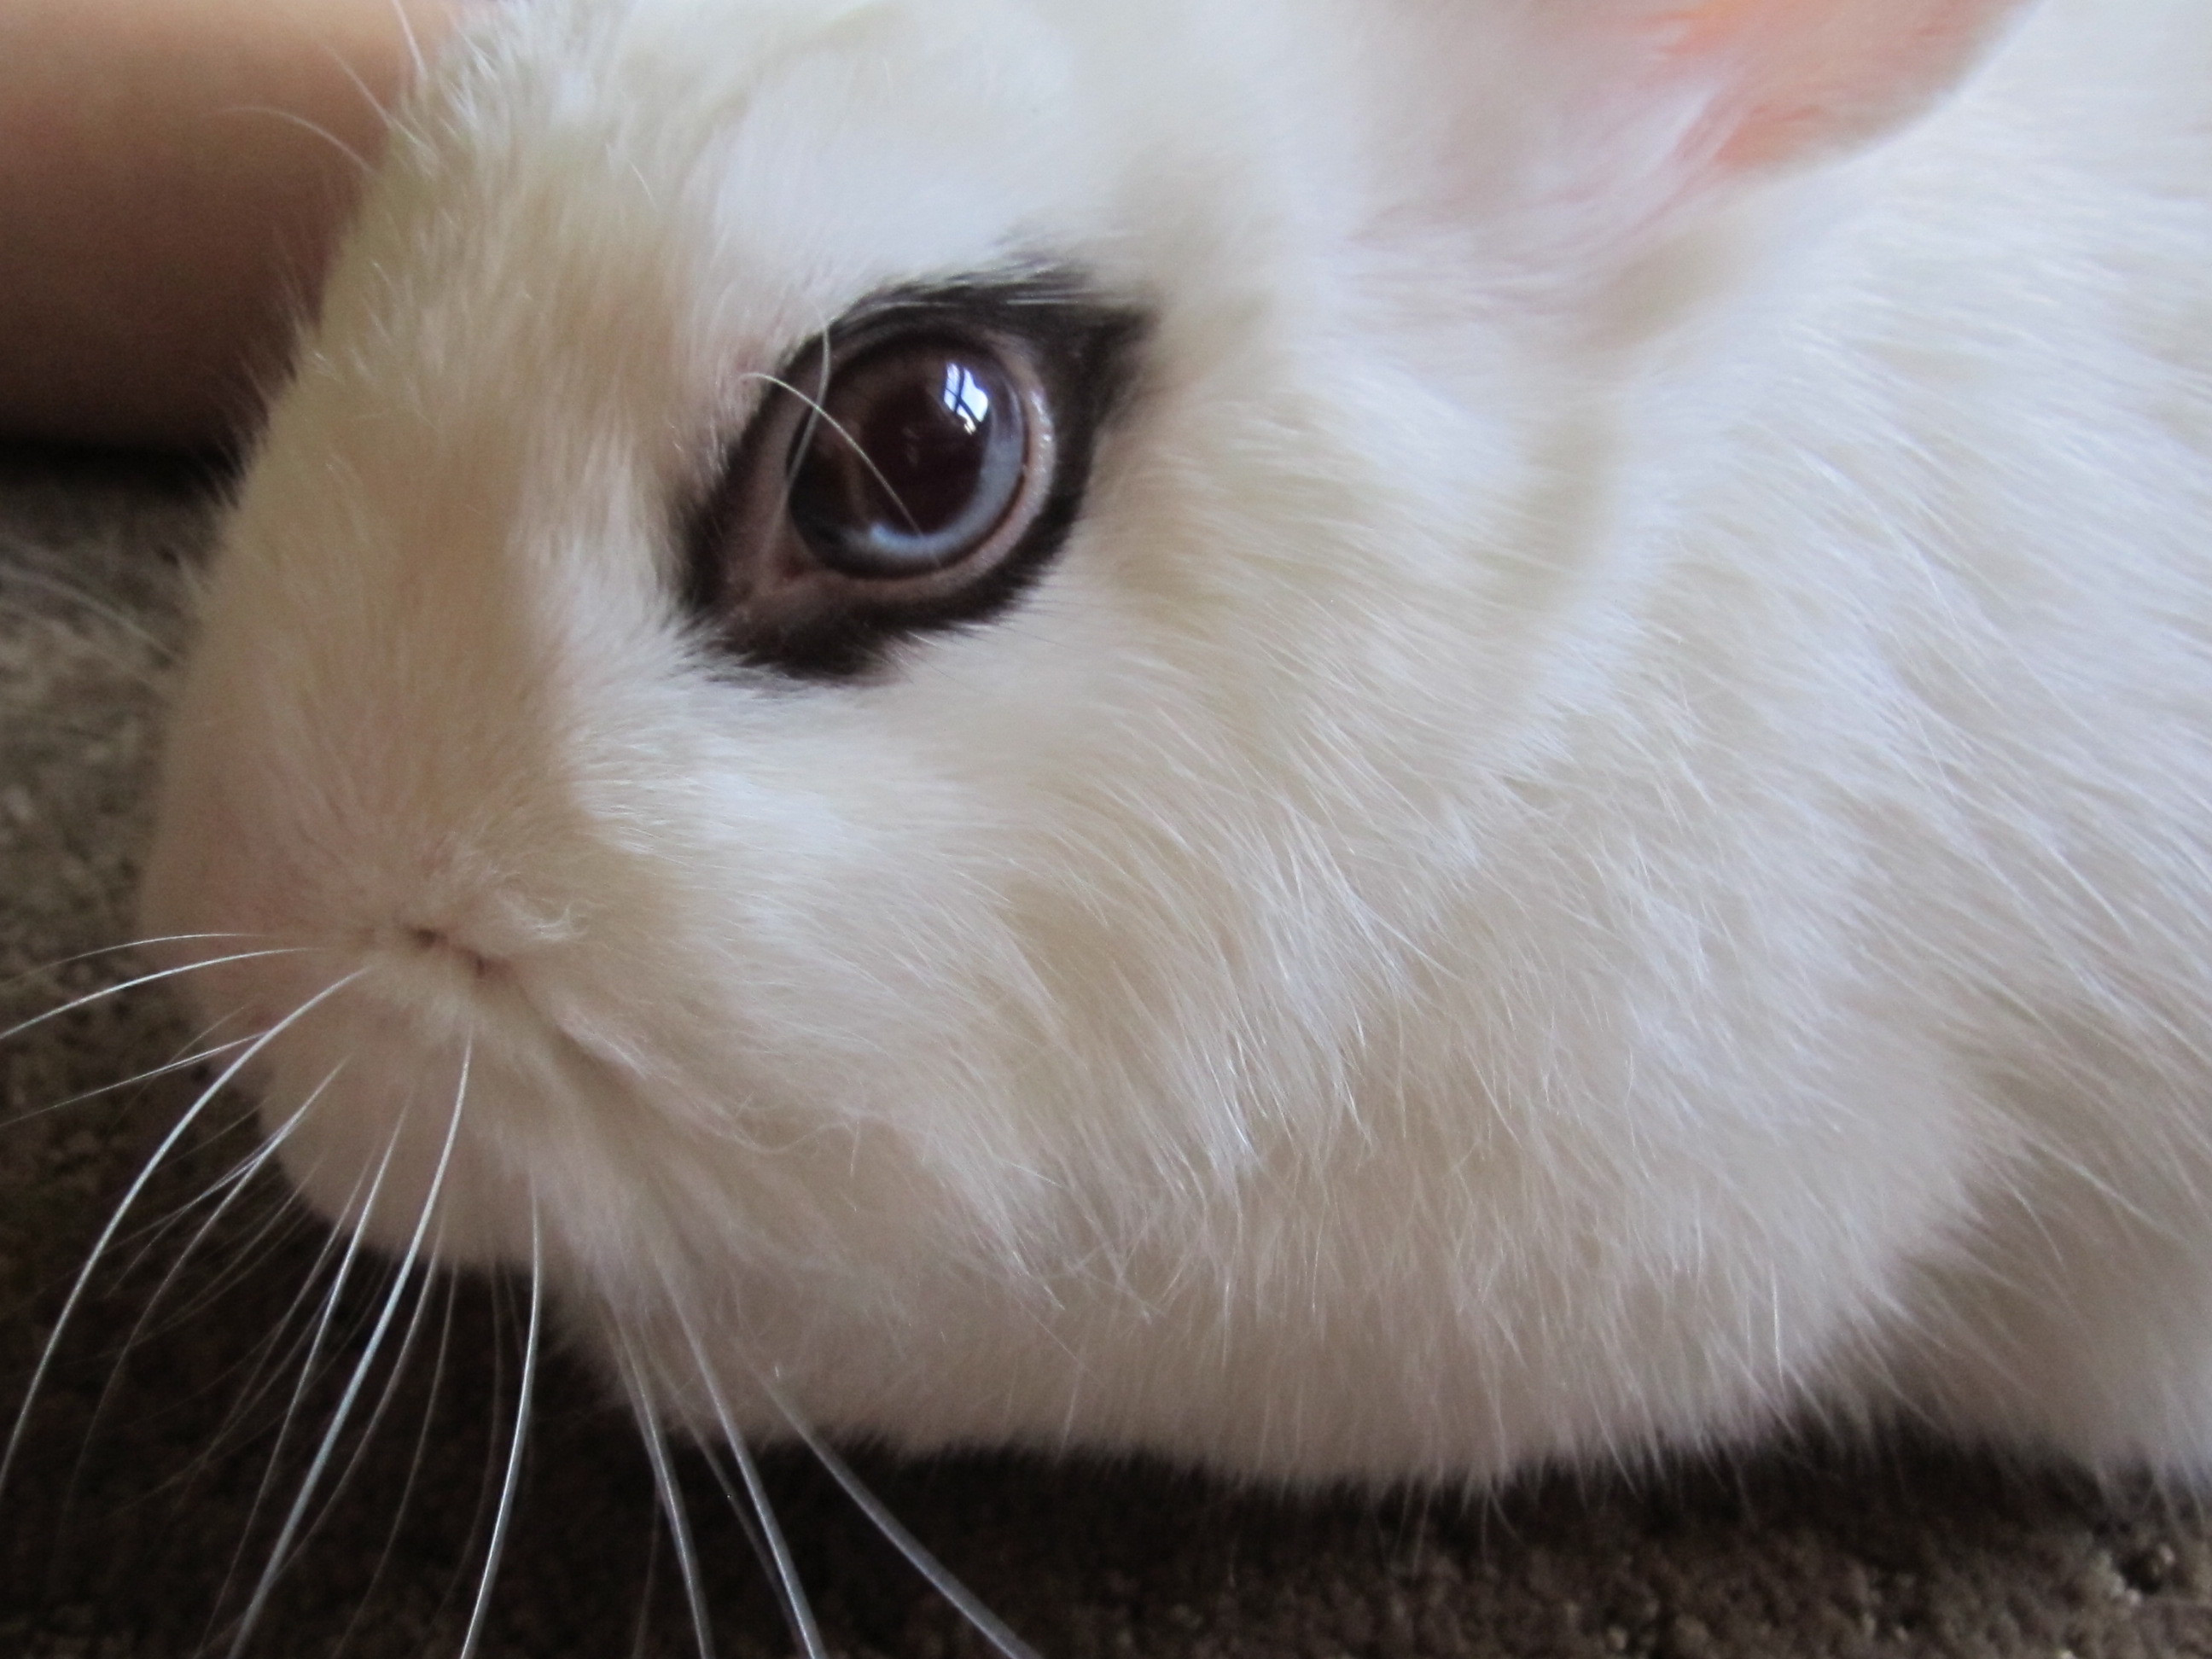 She has a pretty two colored eye : Rabbits